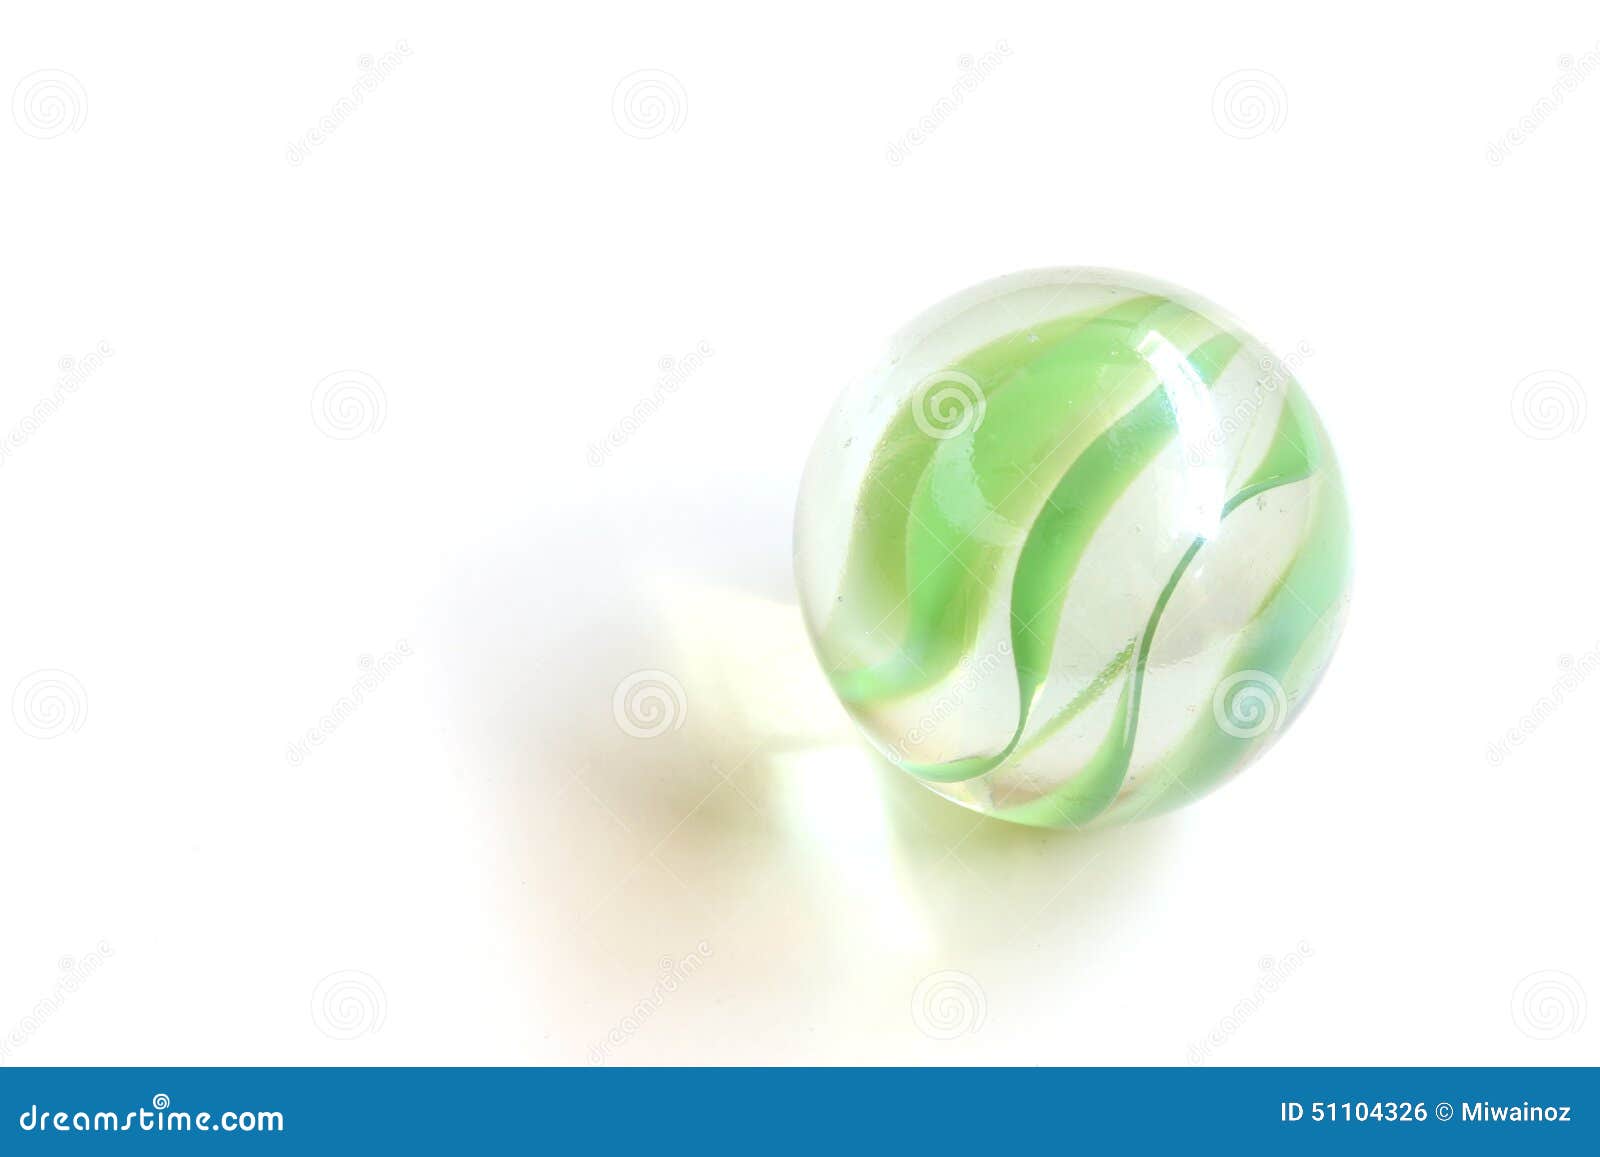 Marble stock photo. Image of transparent, color, pattern - 51104326